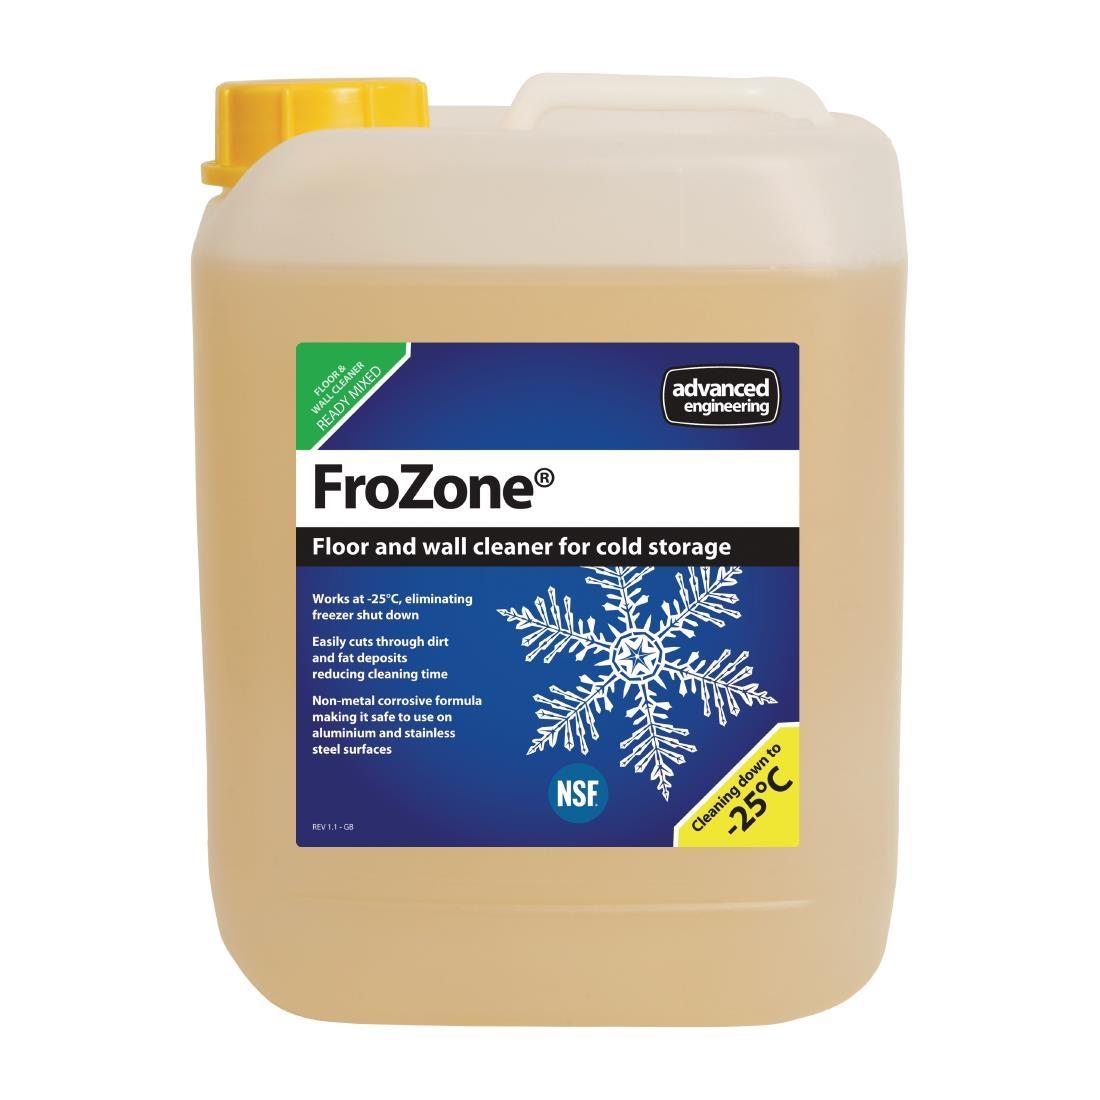 FroZone Low Temperature Refrigerator and Freezer Cleaner Ready To Use 5Ltr (4 Pack) - DB625  - 1